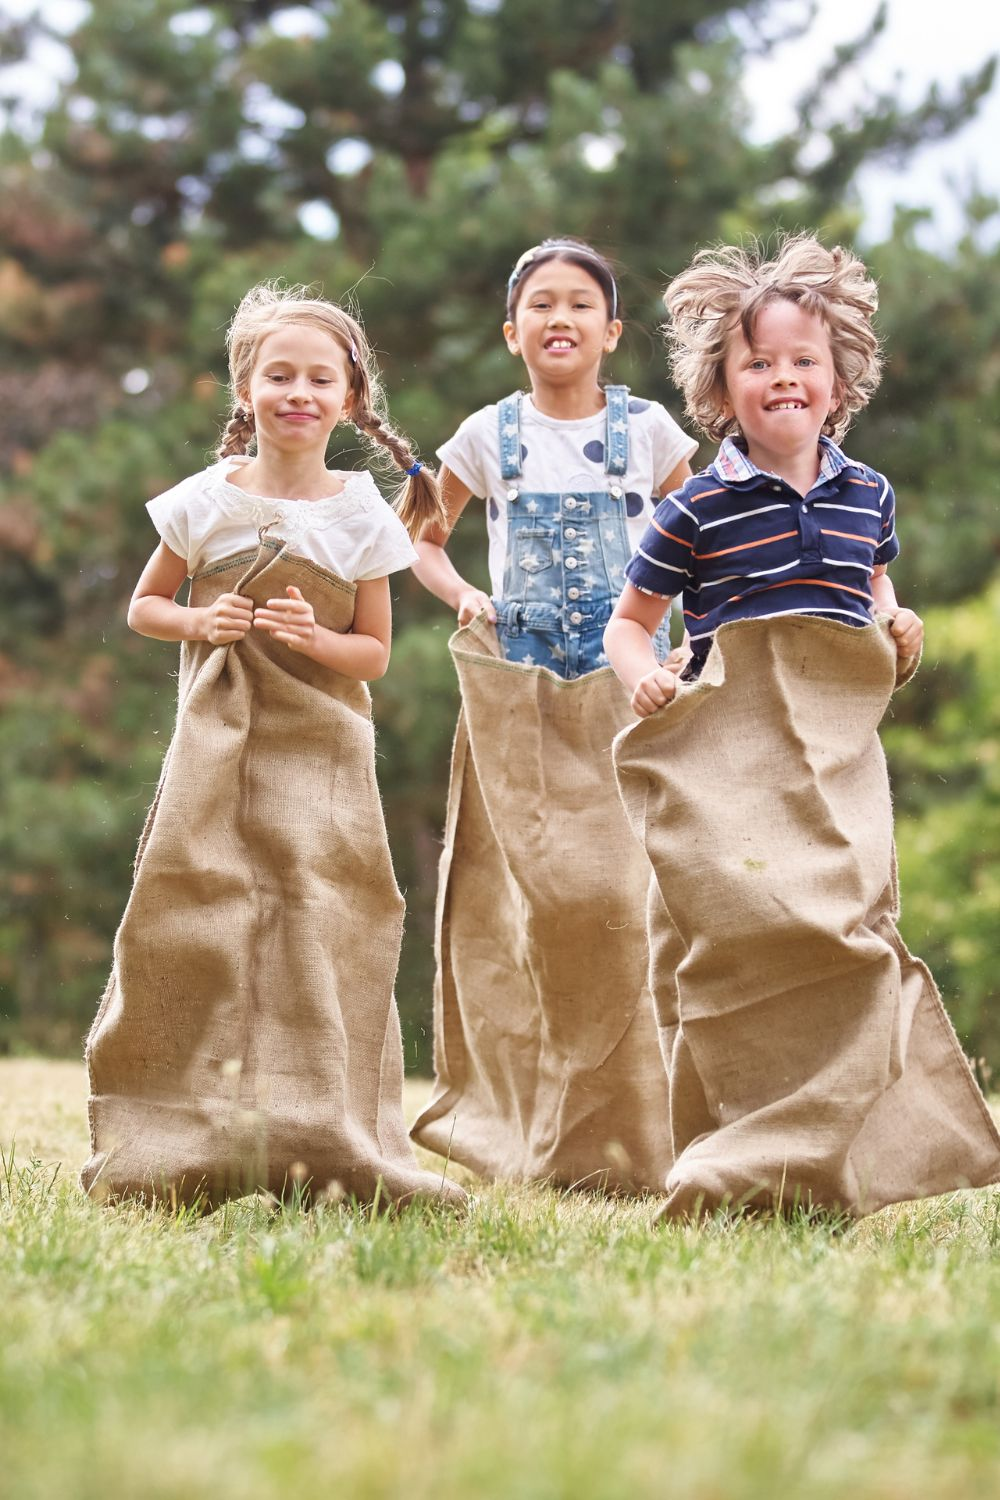 Sack Race - Featured In Kids Party Games 